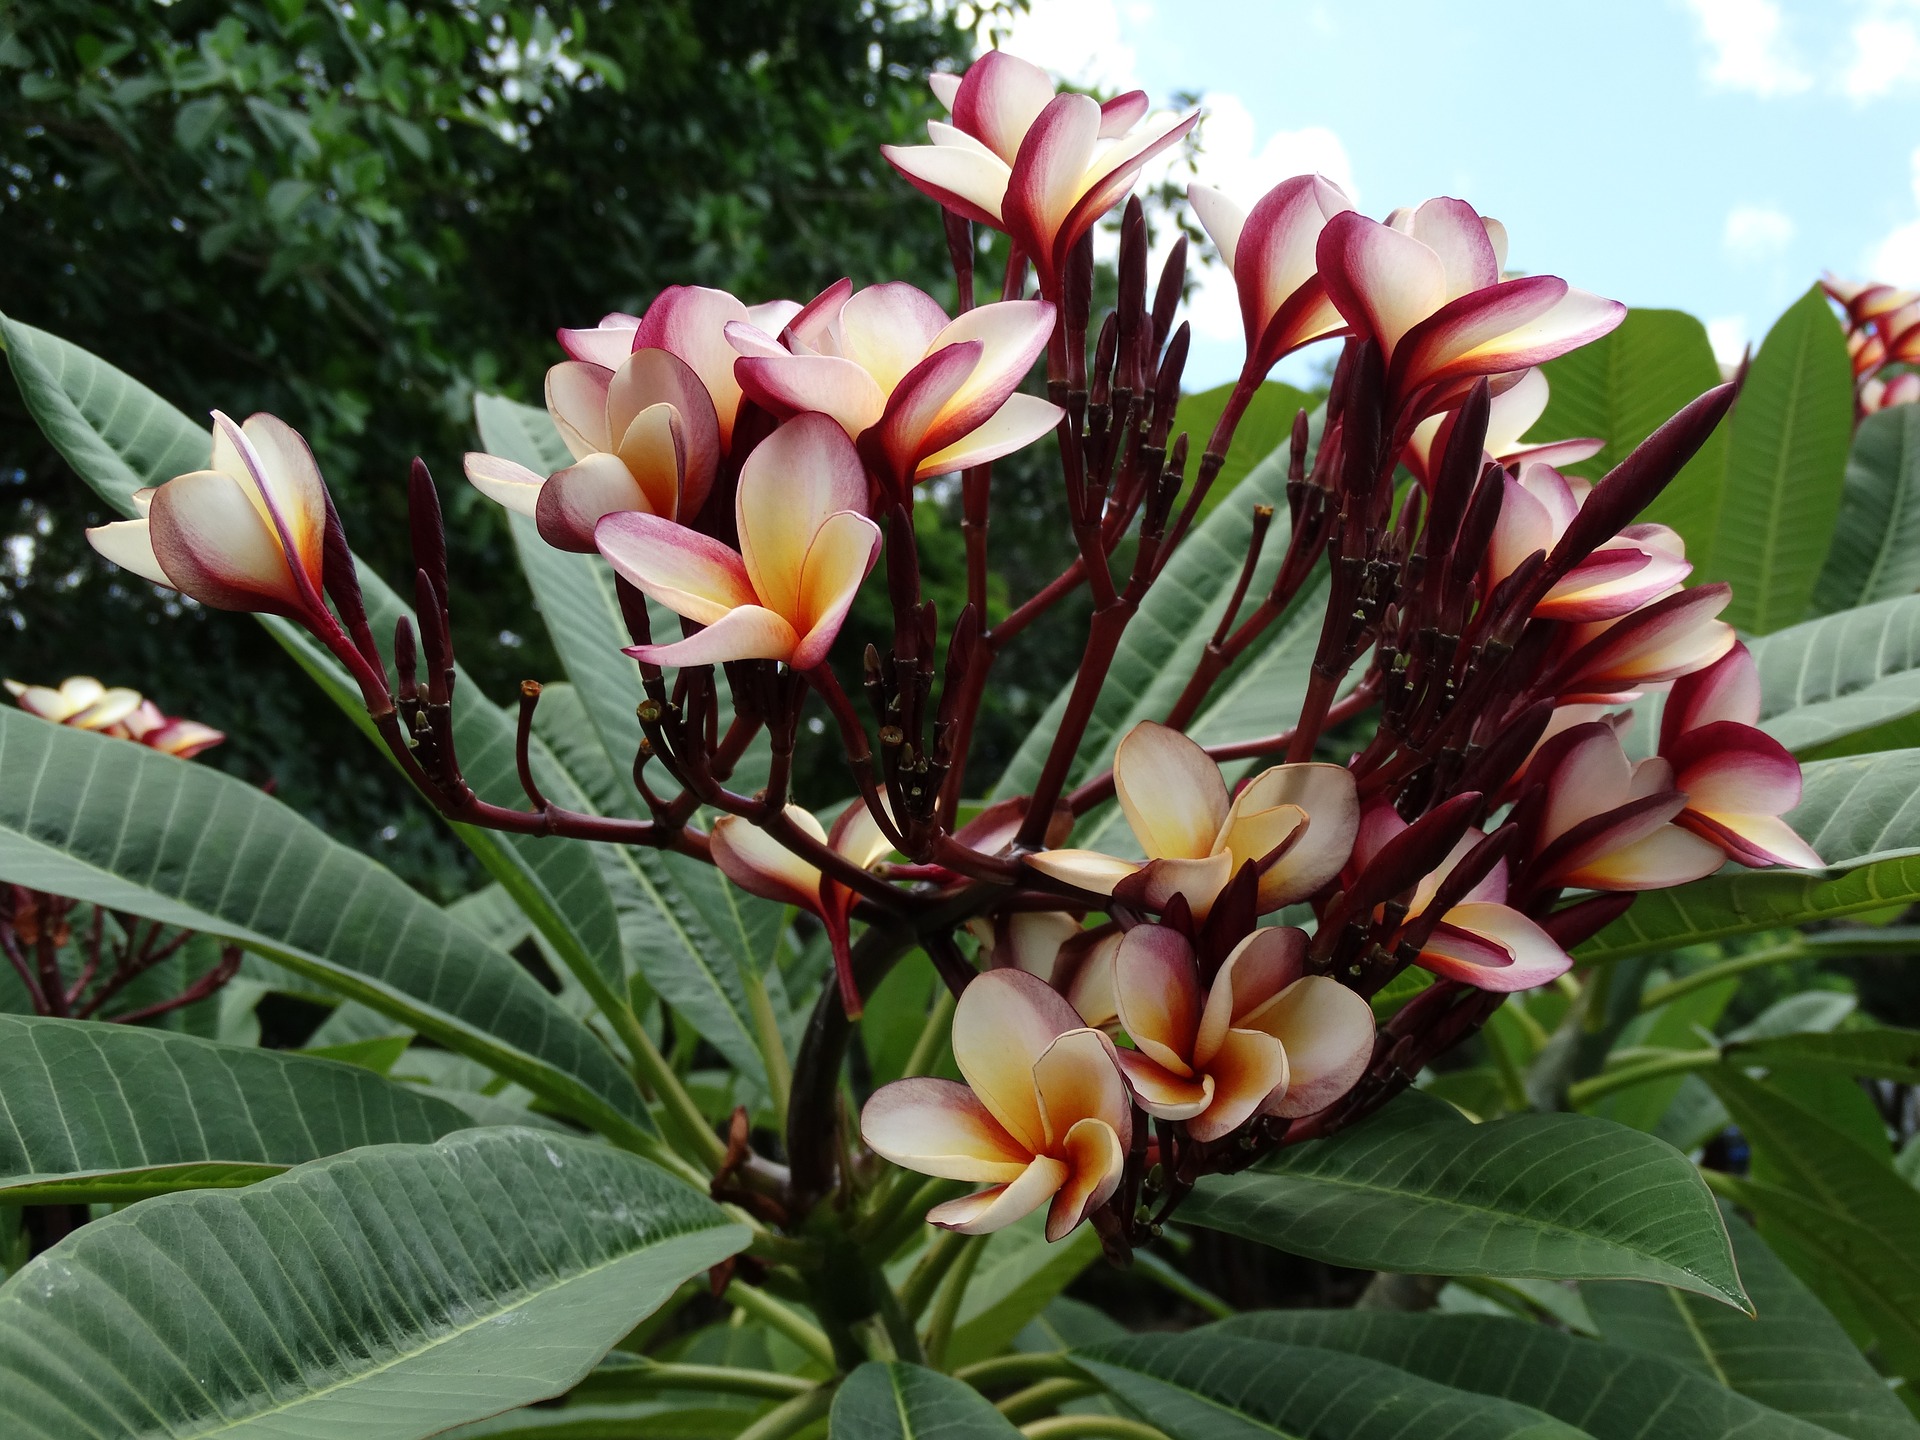 Pink and yellow frangipani flowers surrounded by leaves